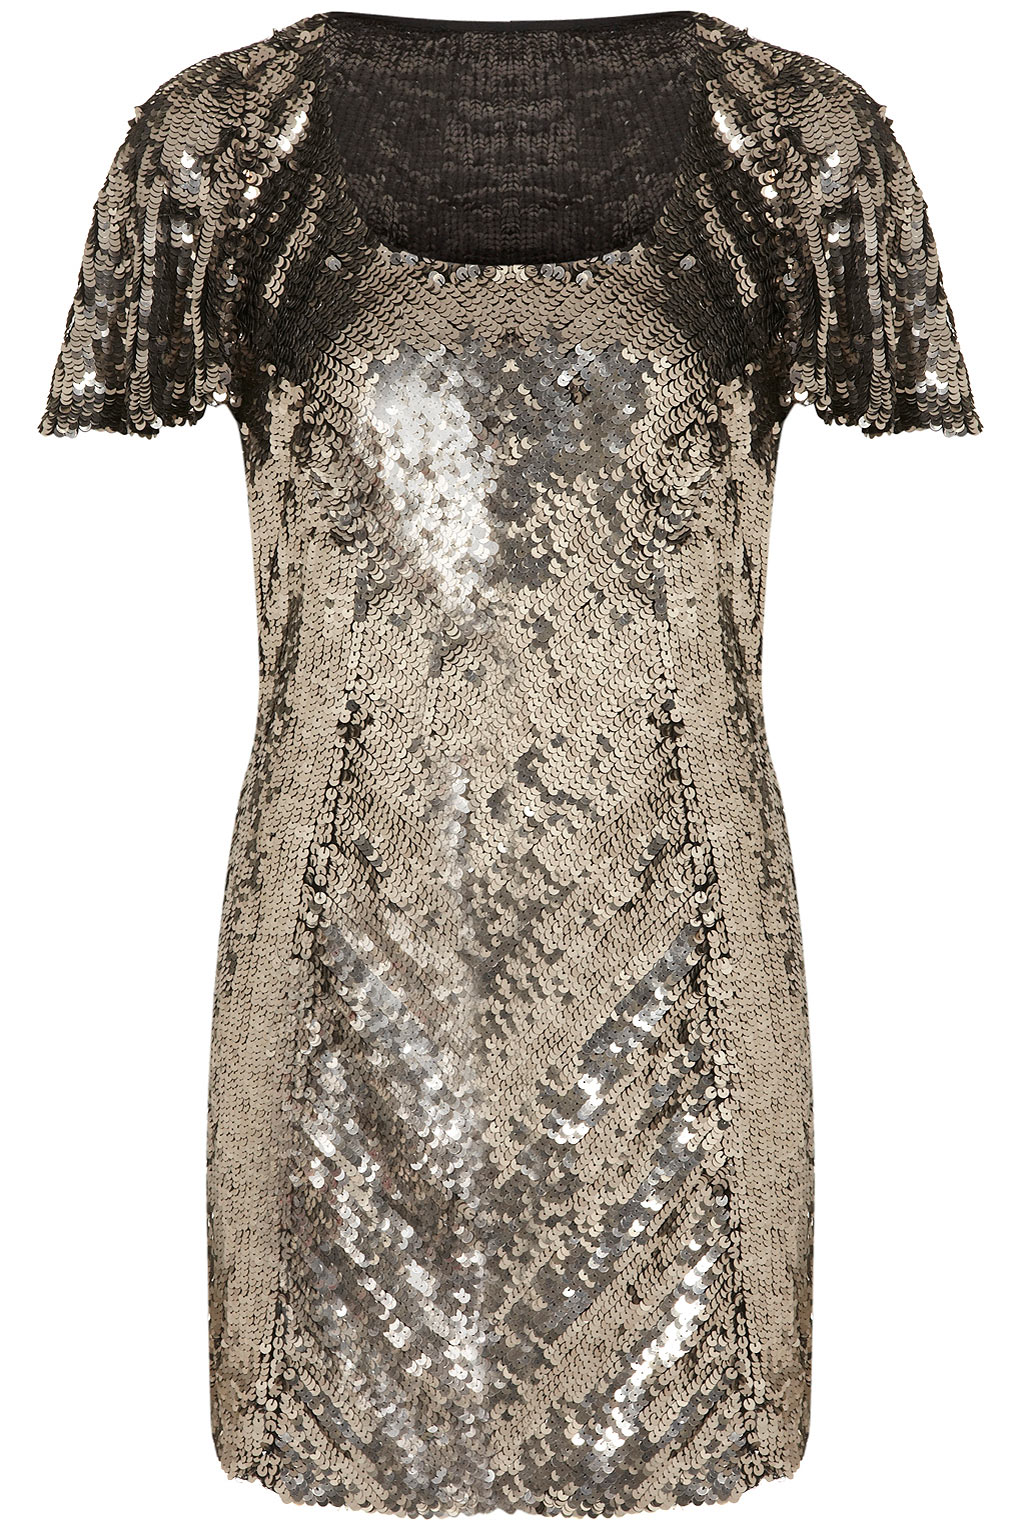 Lyst - Topshop Sequin Cape Back Dress By Dress Up in Metallic